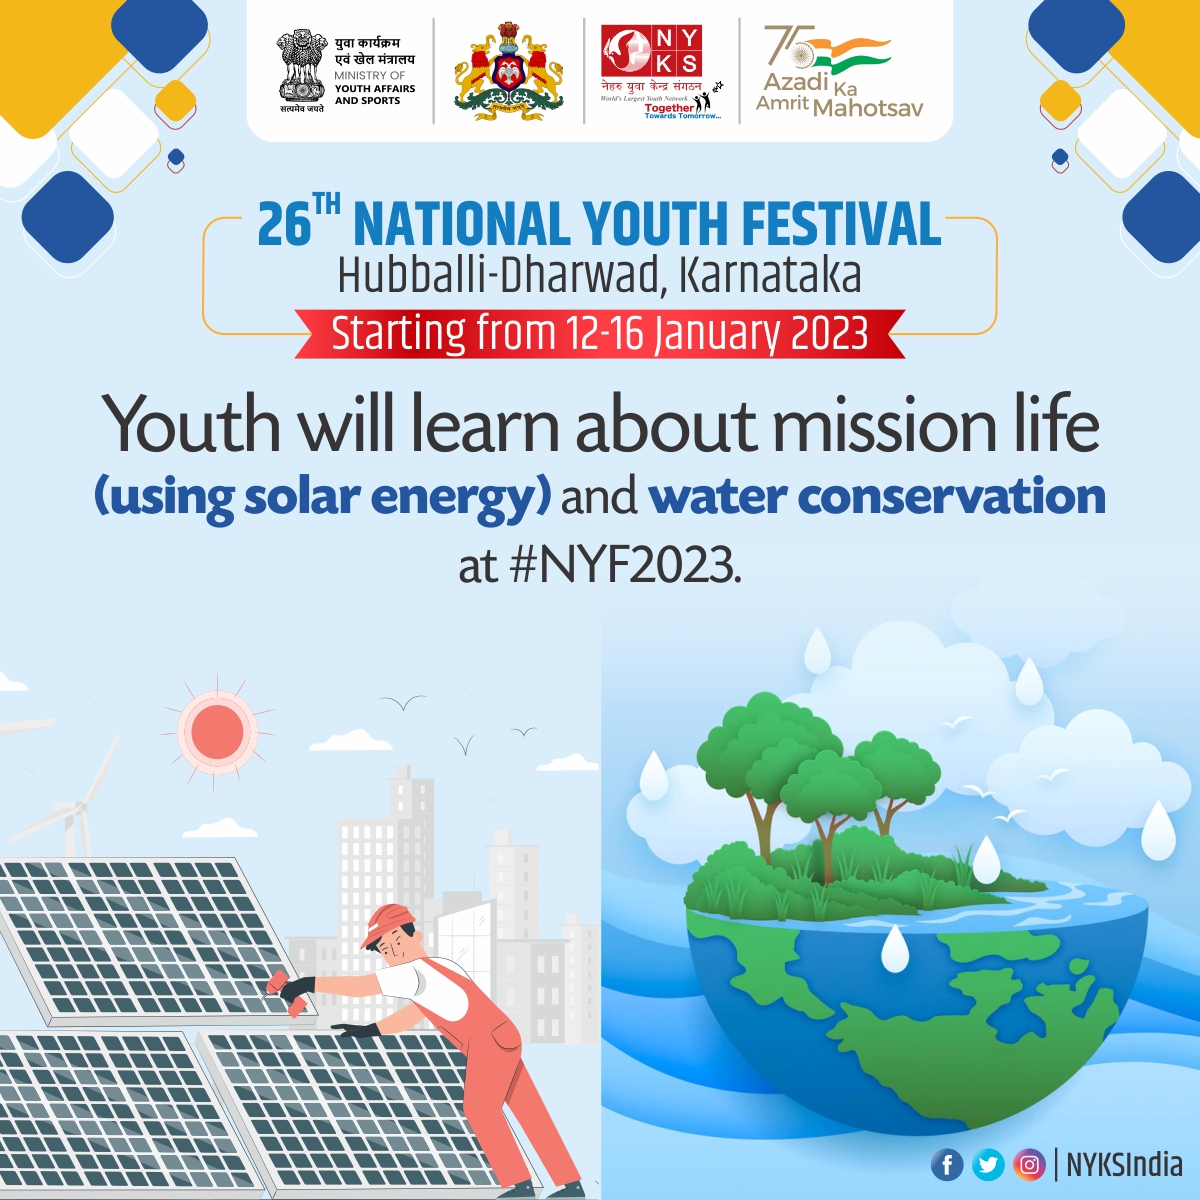 NYF2023: youth will learn about mission life (using solar power) and water conservation. For more info visit: nationalyouthfestival2023.com #NYF2023 #NYKSYouthFestival #NationalYouthFestival #Youth